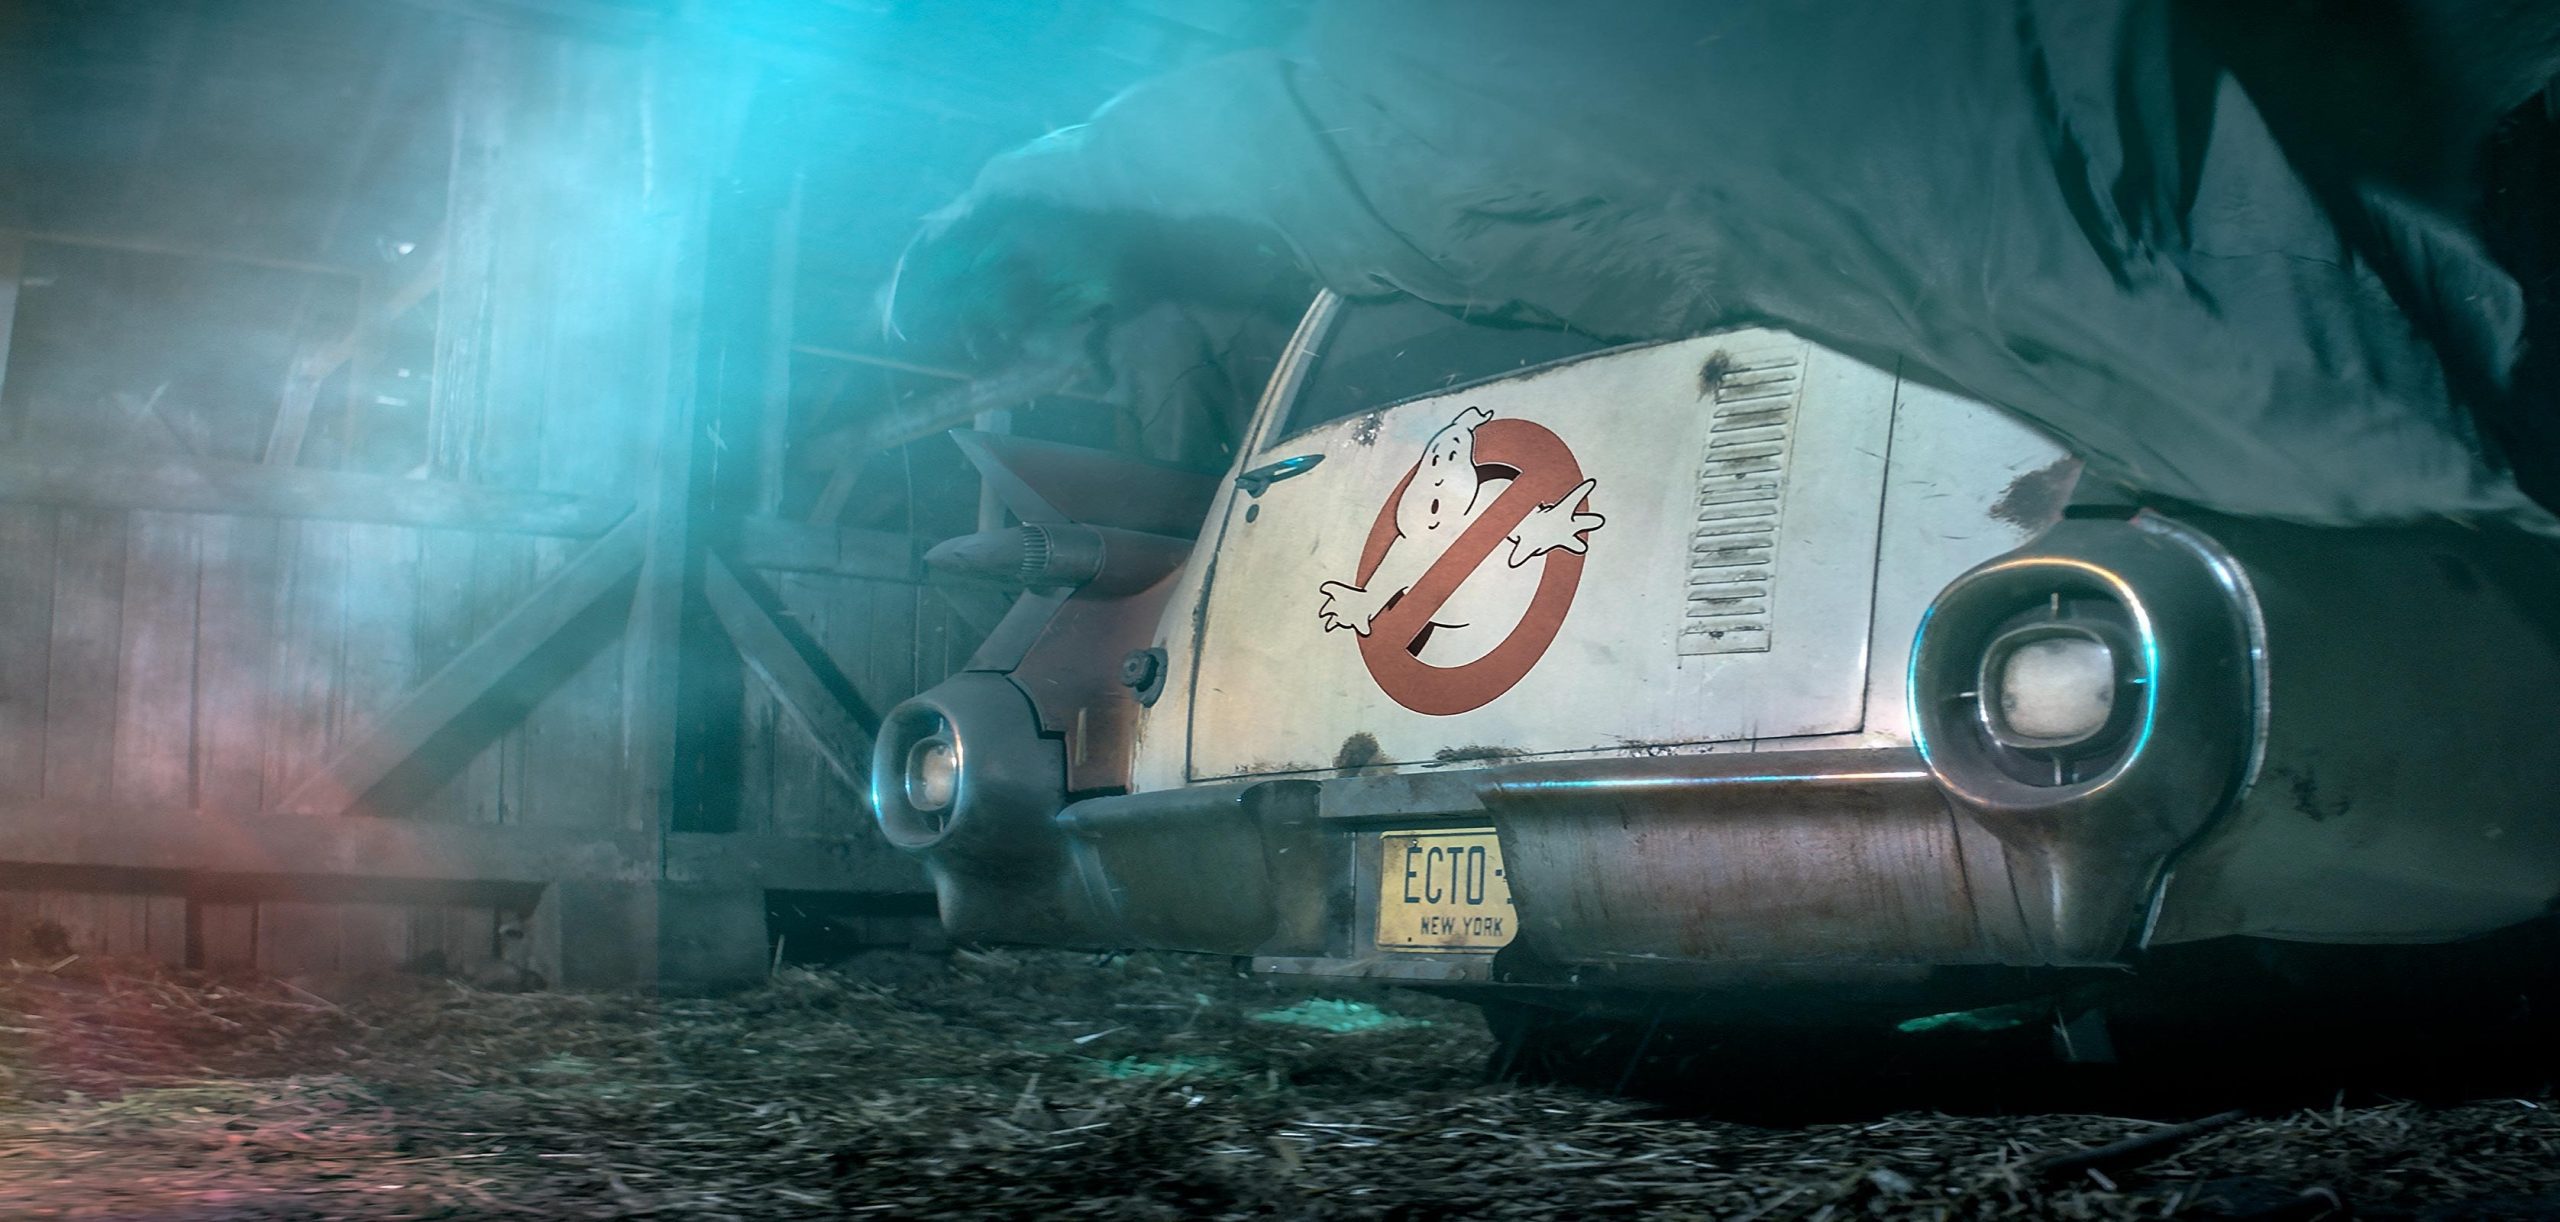 ghostbusters spirits unleashed